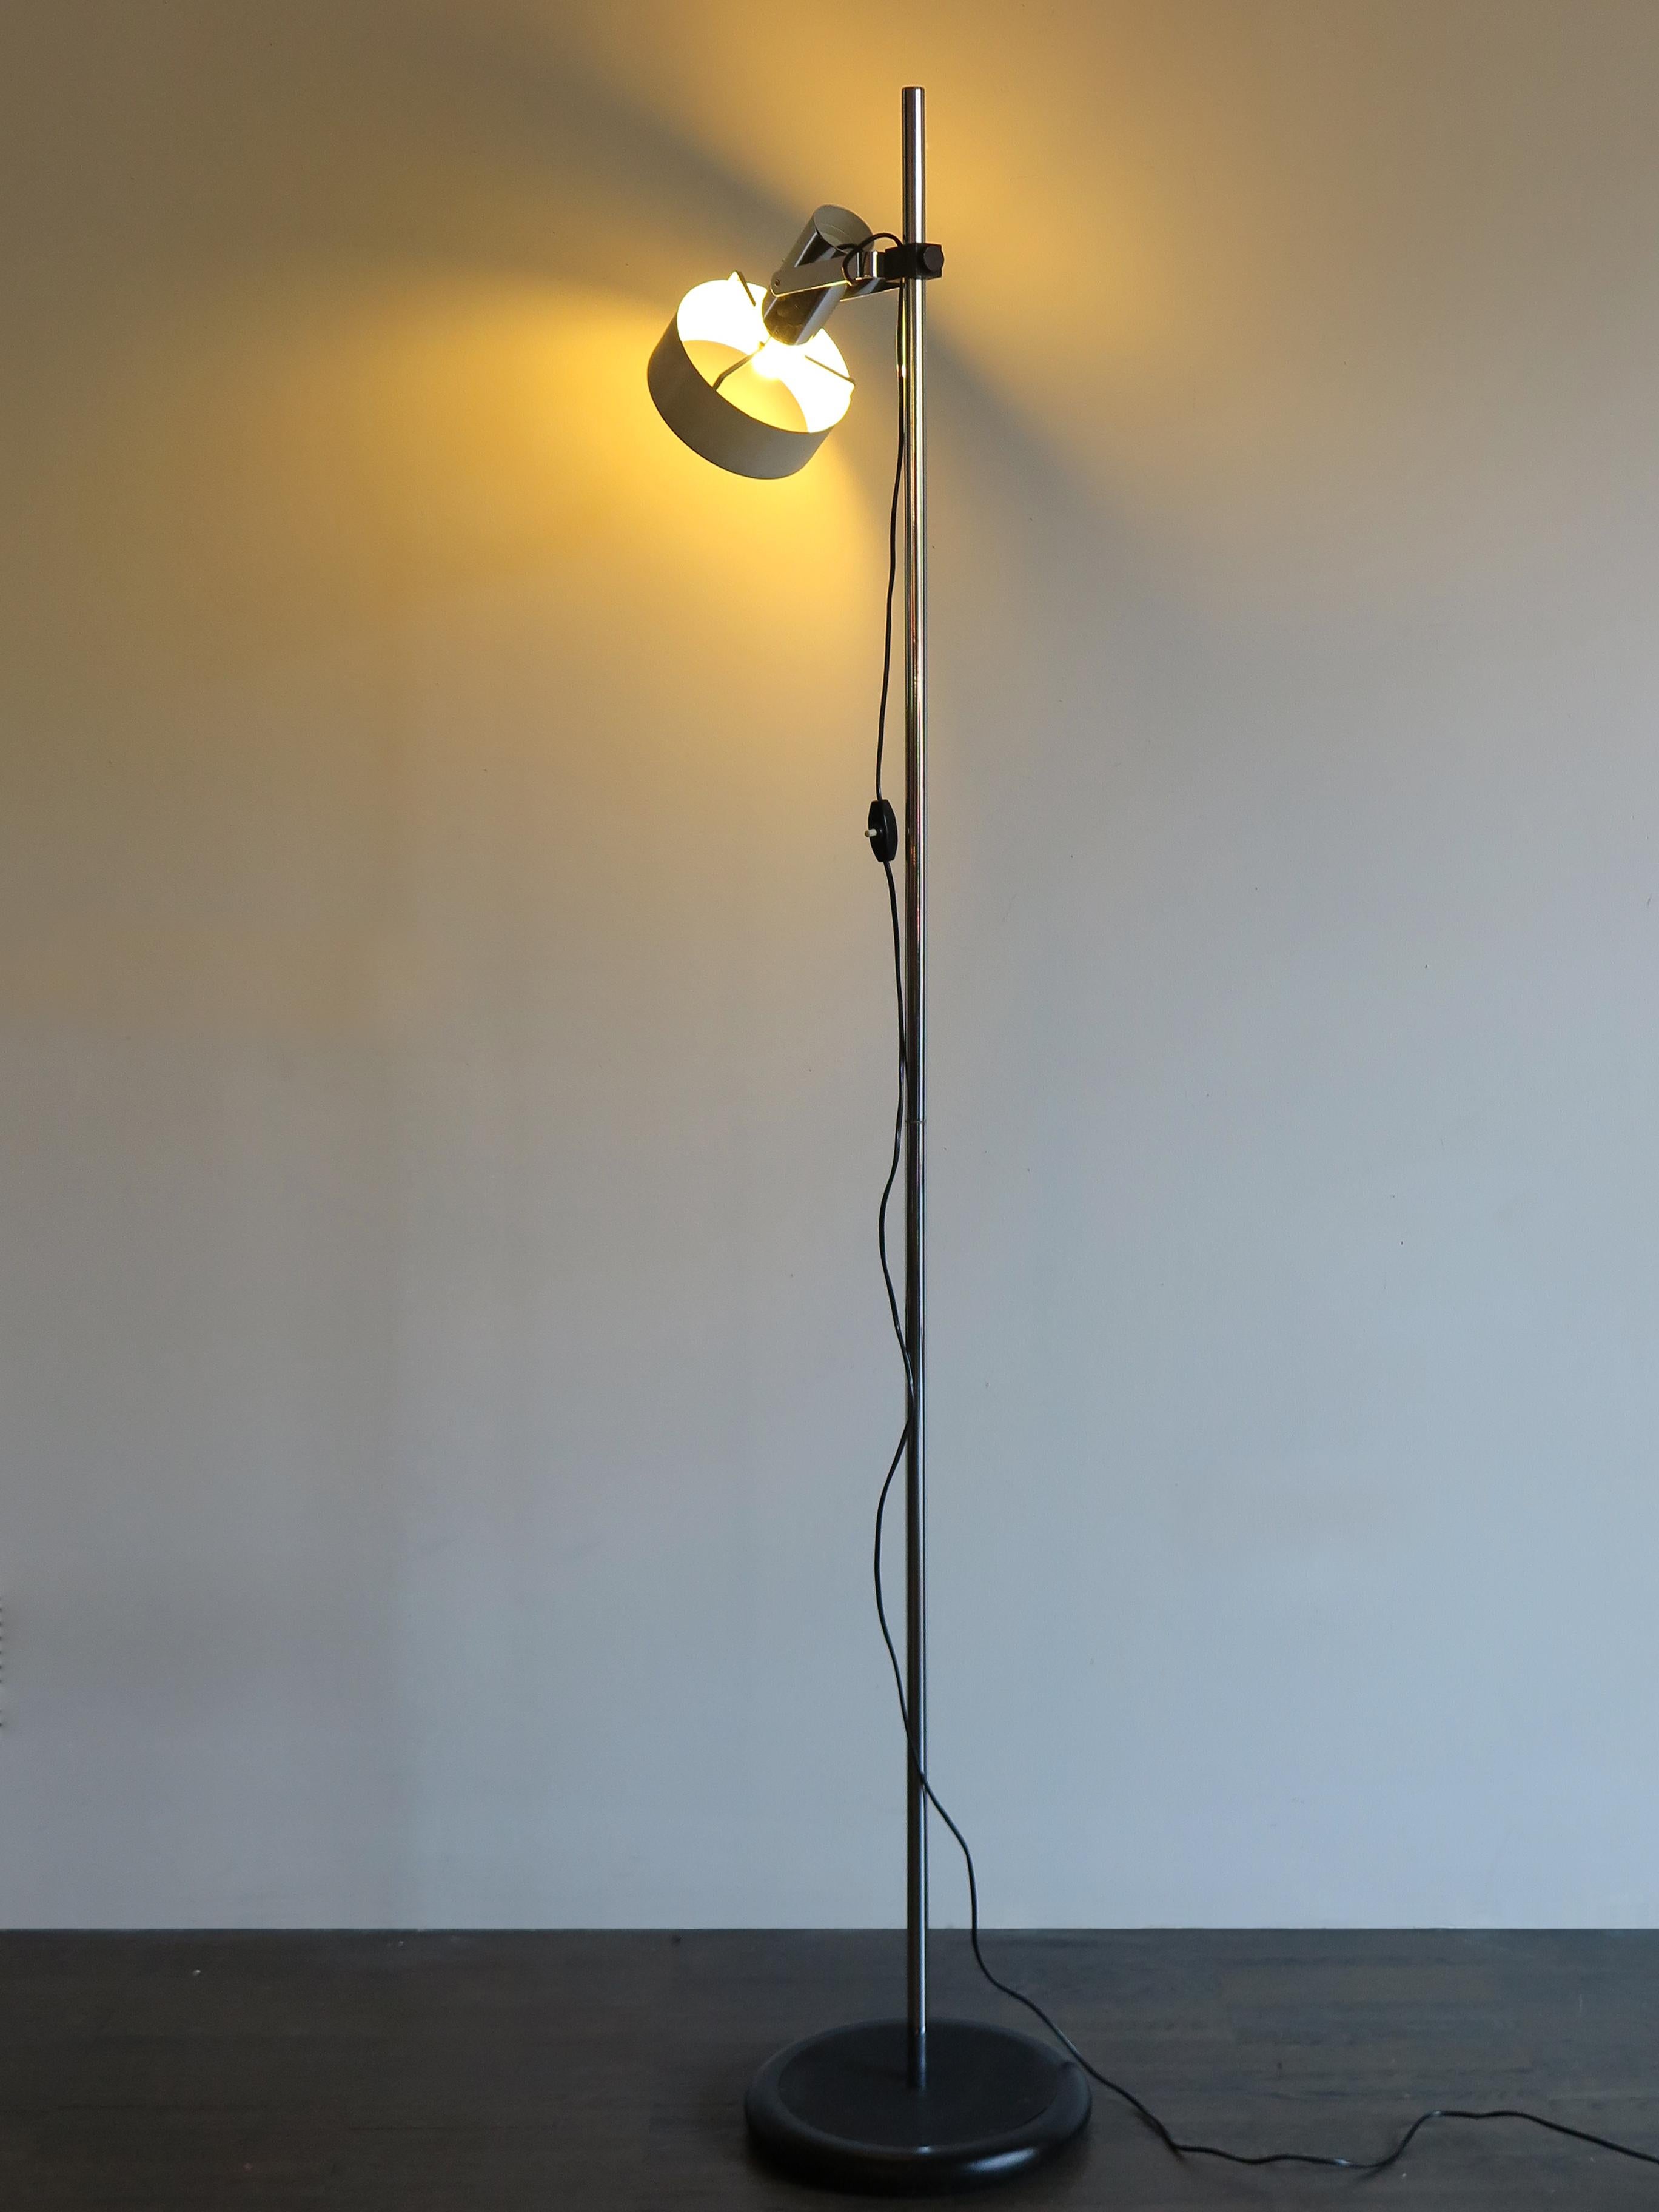 Italian Mid-Century Modern design Stilnovo floor lamp with white lacquered adjustable spot, circular metal base and chromed metal structure, engraved Stilnovo Made in Italy brand, circa 1960s

Please note that the lamps are original of the period